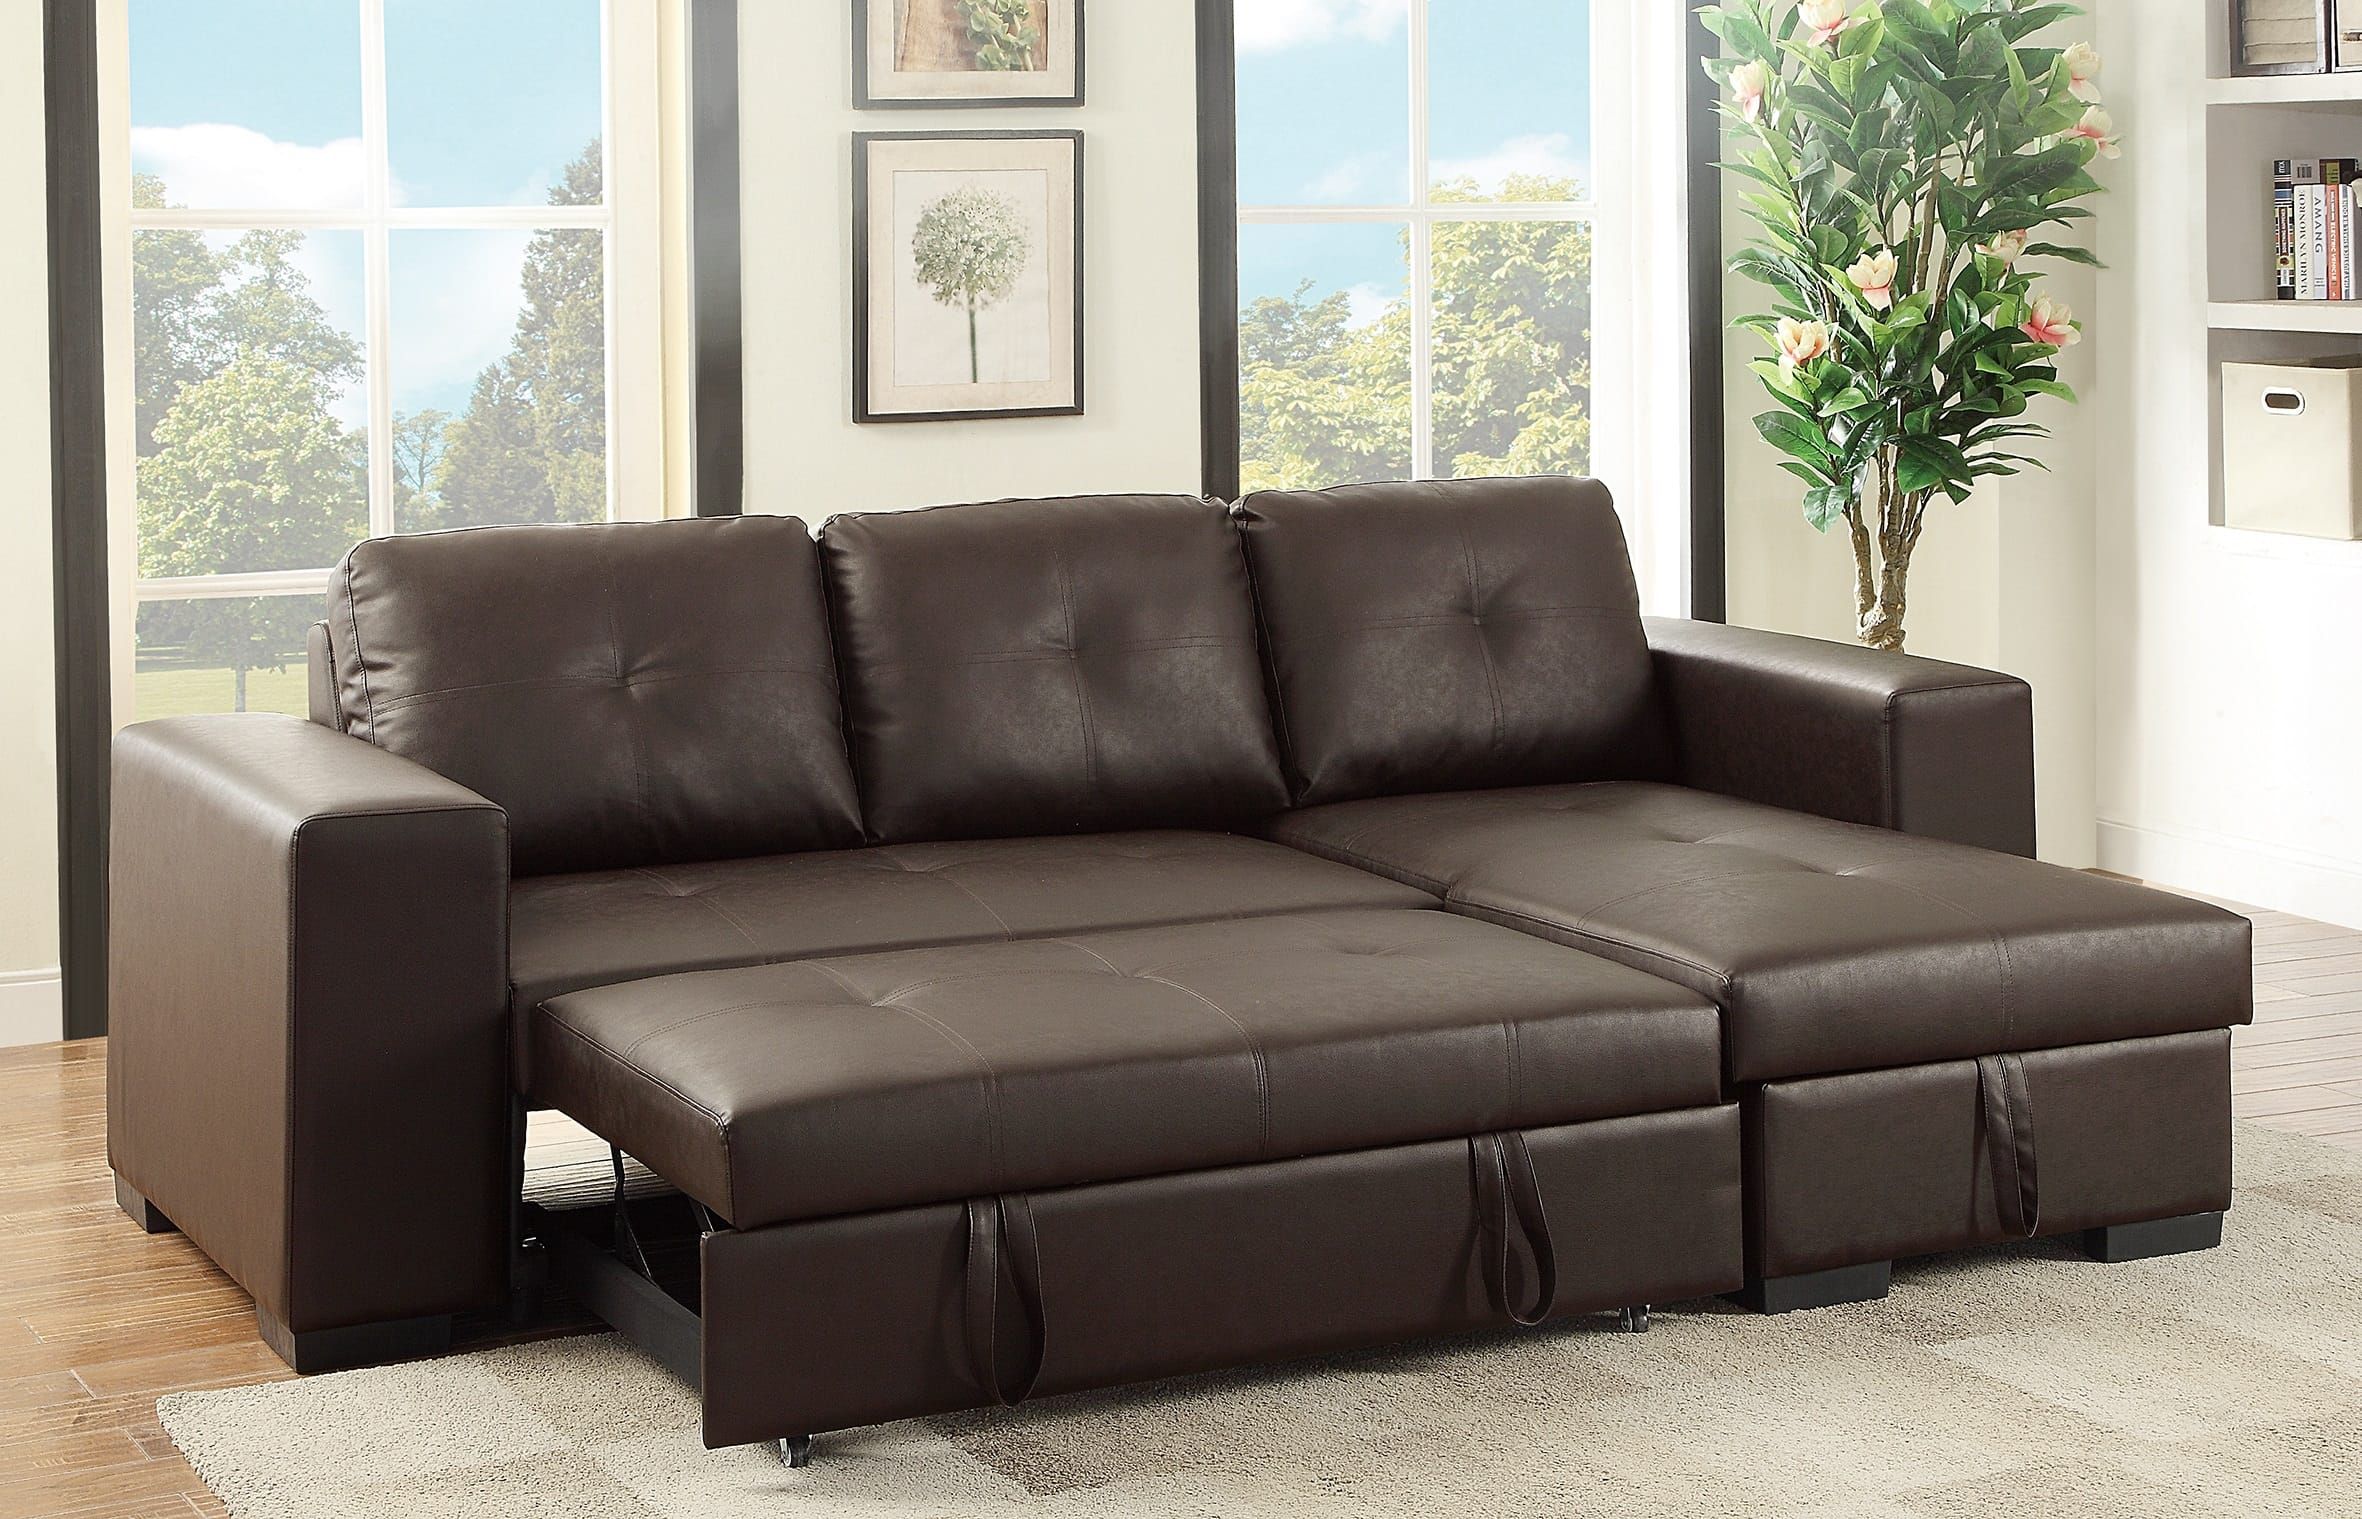 F6930 Espresso Convertible Sectional Sofapoundex Pertaining To 3 Seat Convertible Sectional Sofas (Gallery 17 of 20)